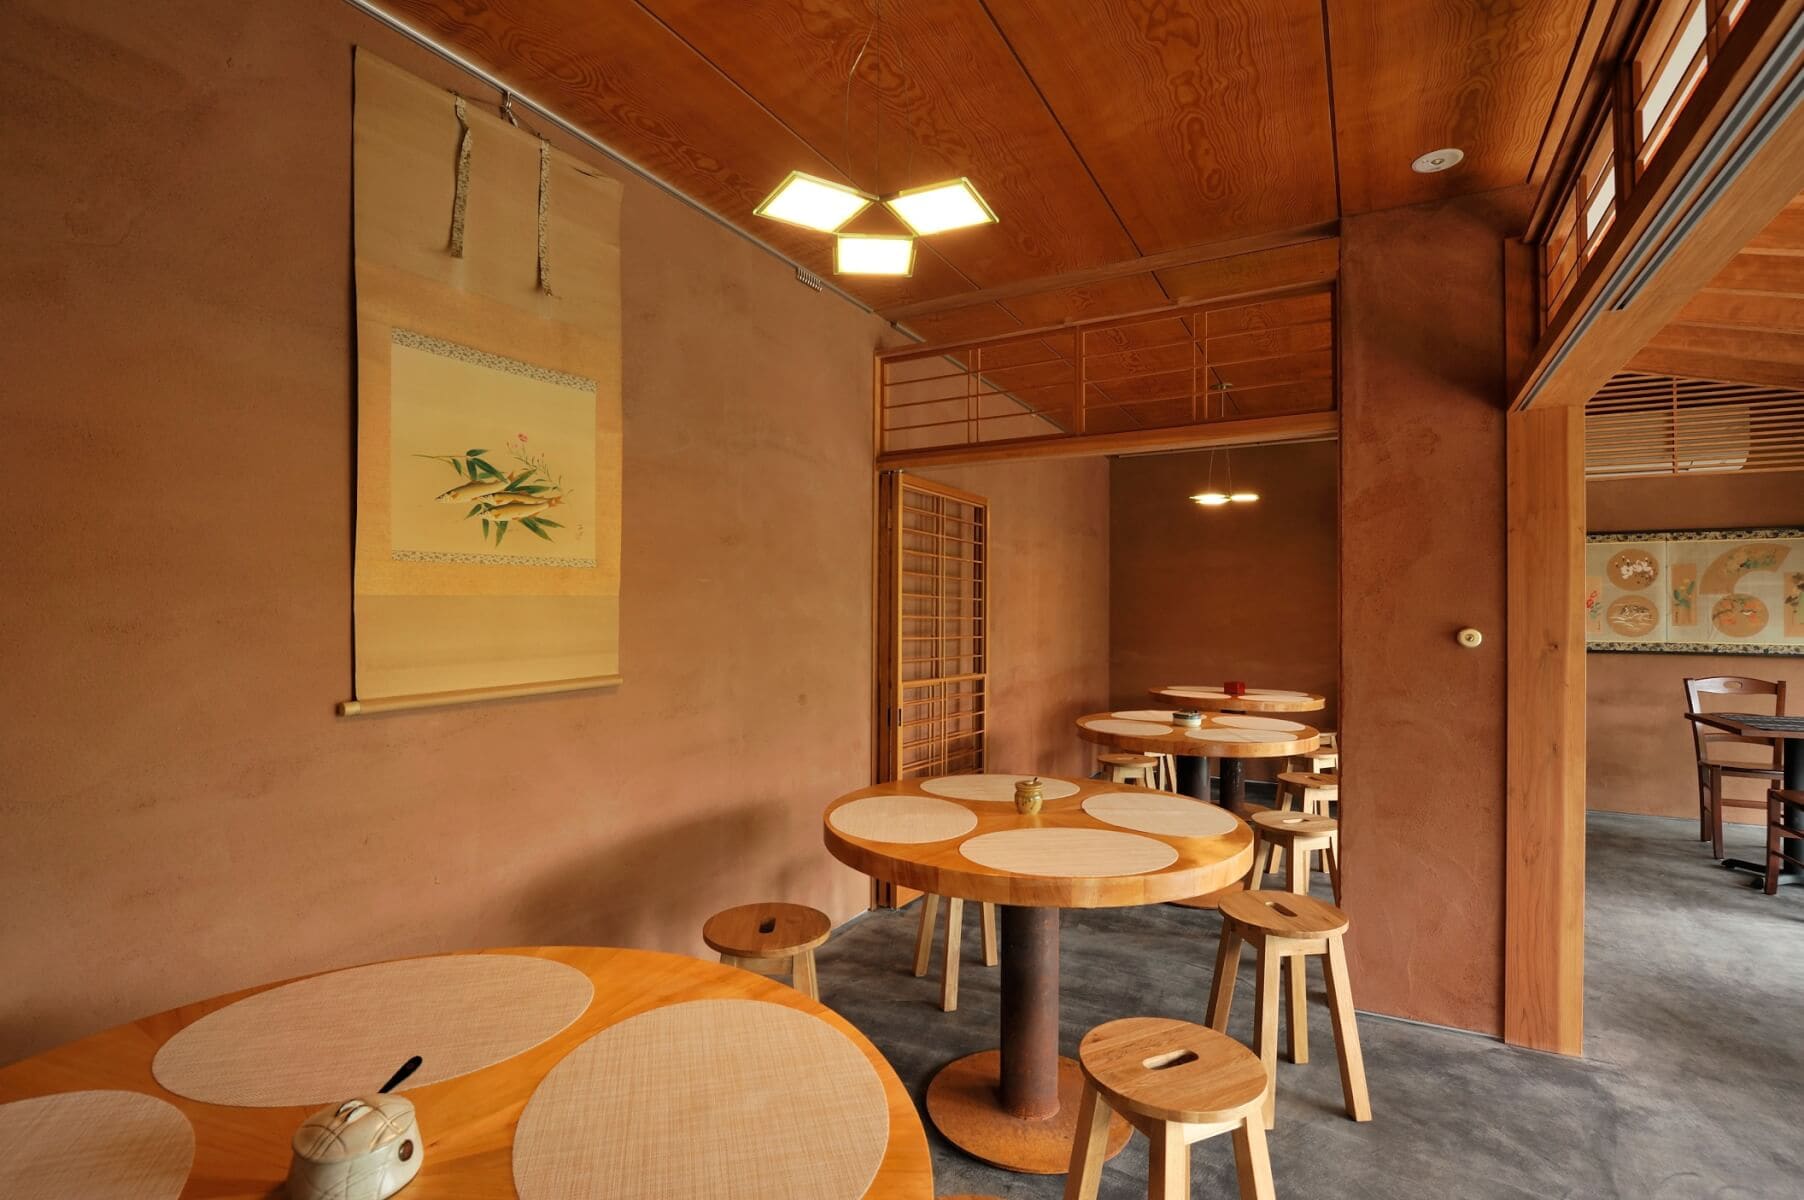 Garden café Nishiki in Yamagata with pendant OLED luminaire Floating x 3wings above the table